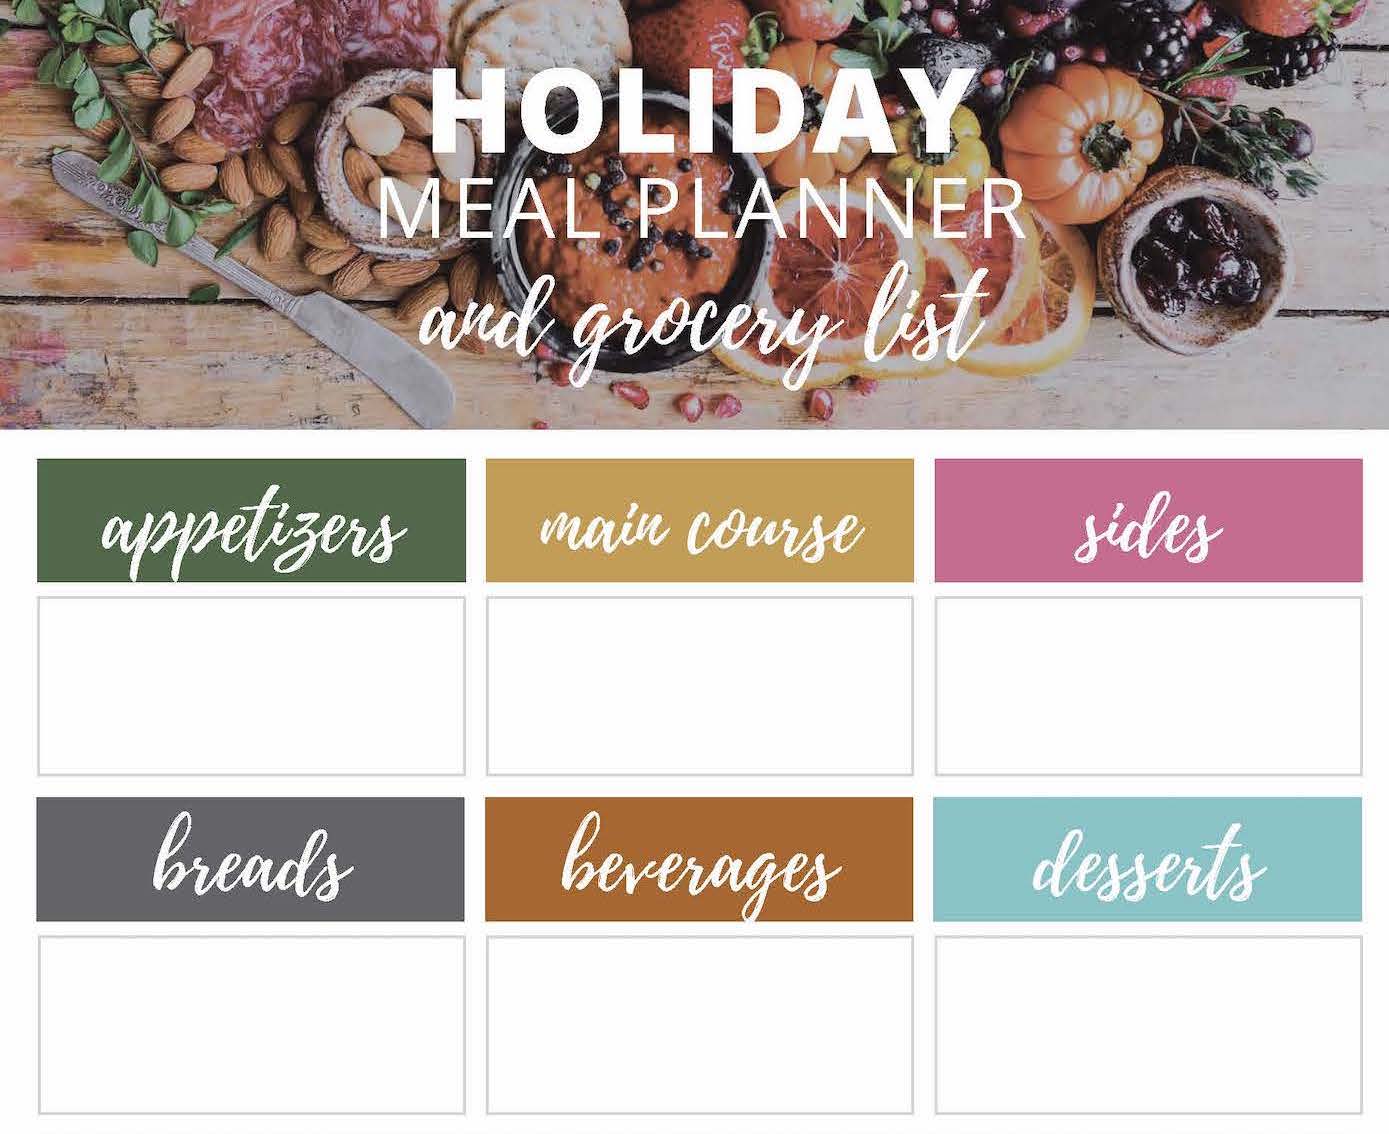 Holiday meal planner template.